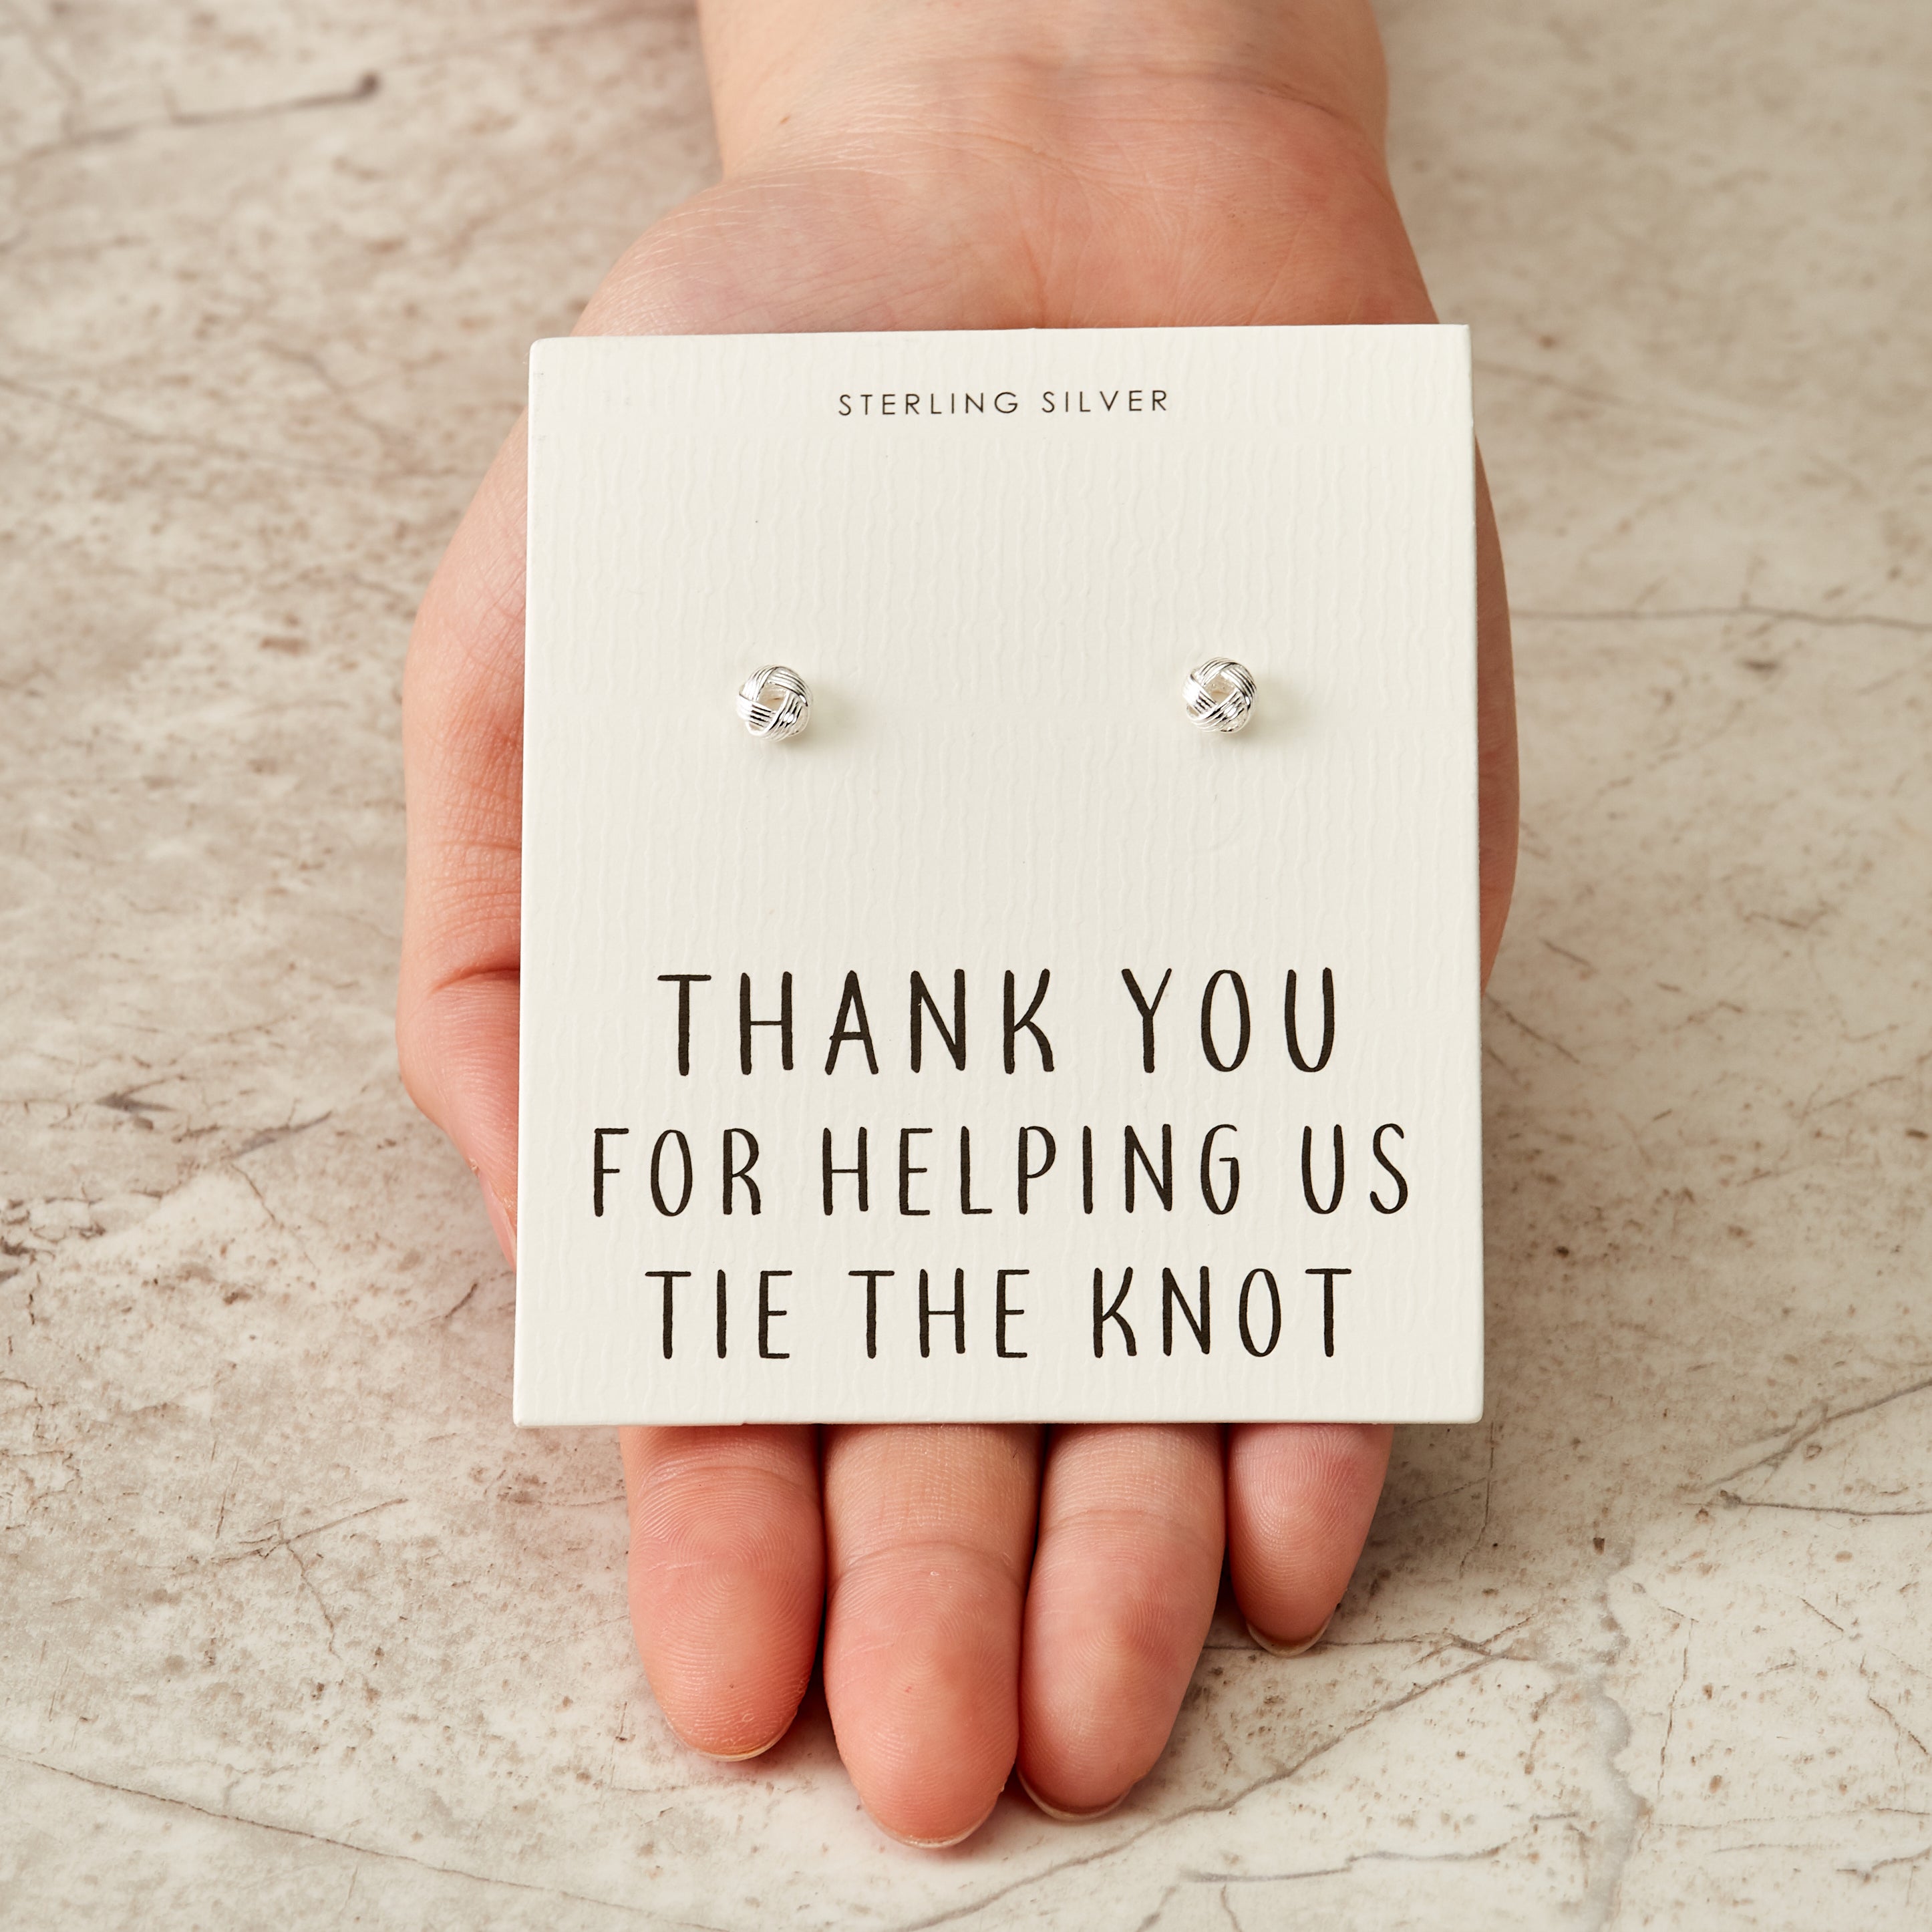 Sterling Silver Thank You for Helping us Tie The Knot Earrings